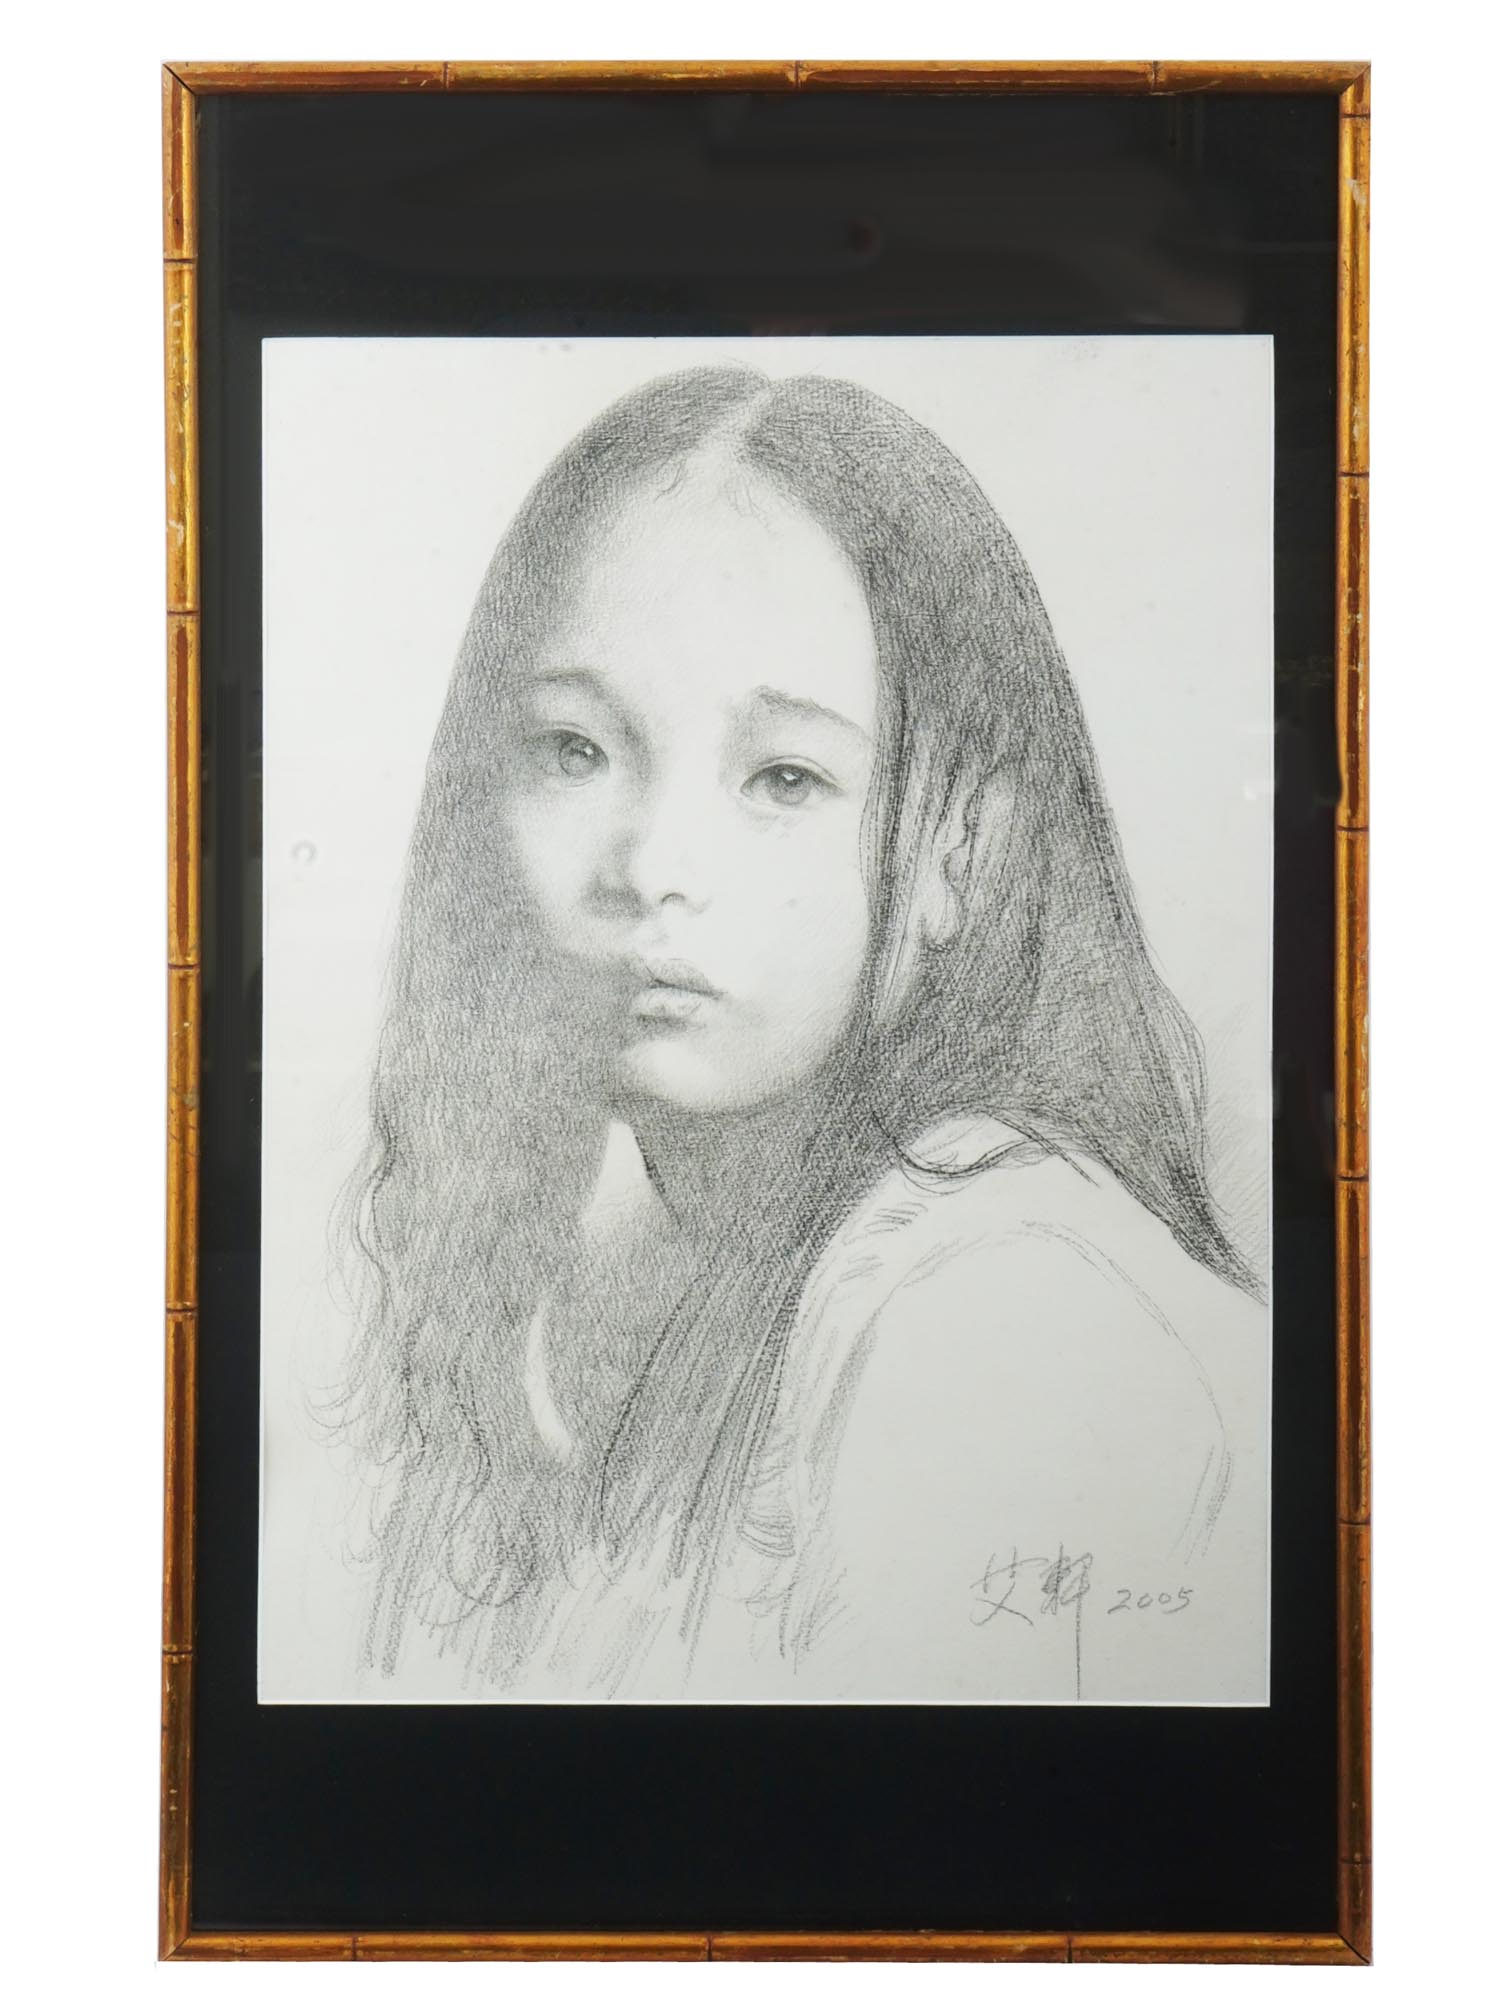 CONTEMPORARY CHINESE DRAWING GIRL PORTRAIT BY AI XUAN PIC-0